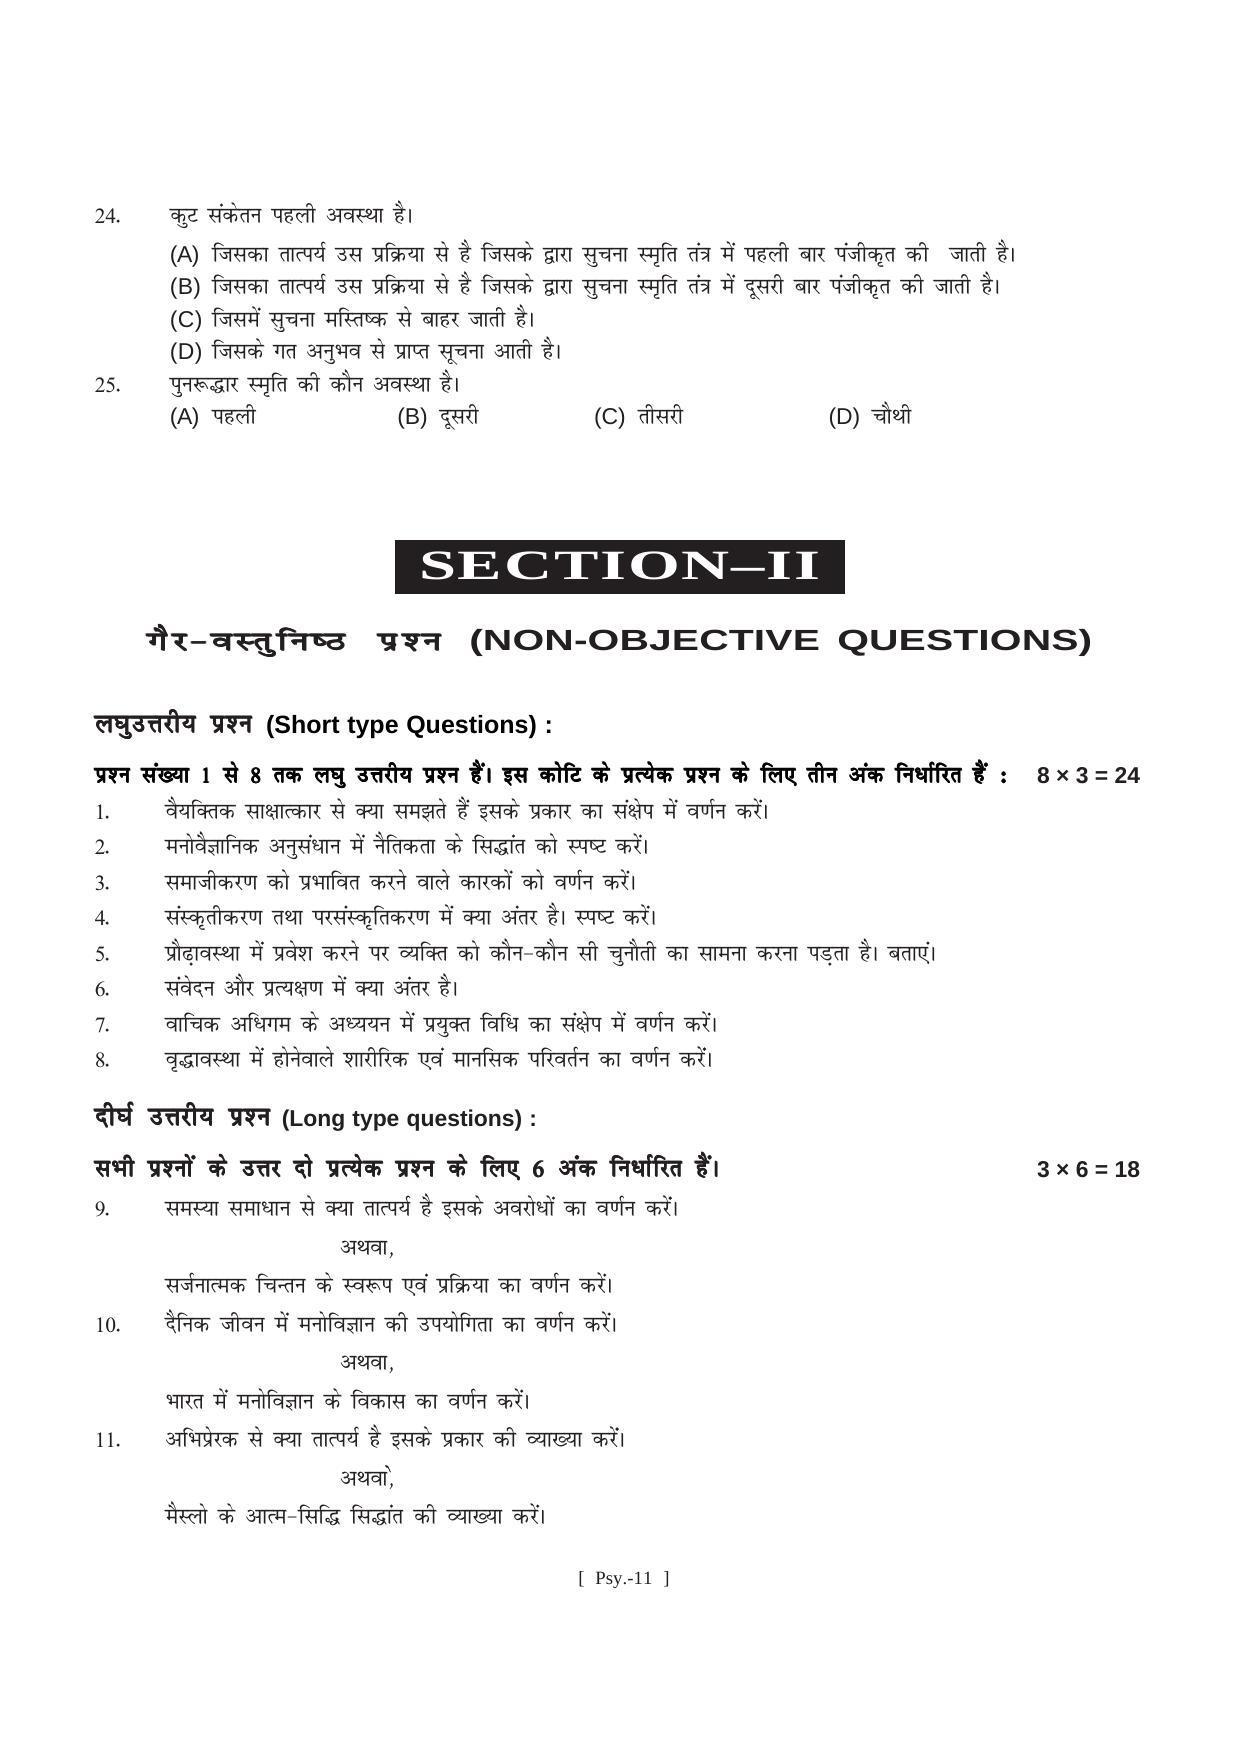 Bihar Board Class 11 Psychology (All Groups) Model Paper - Page 11